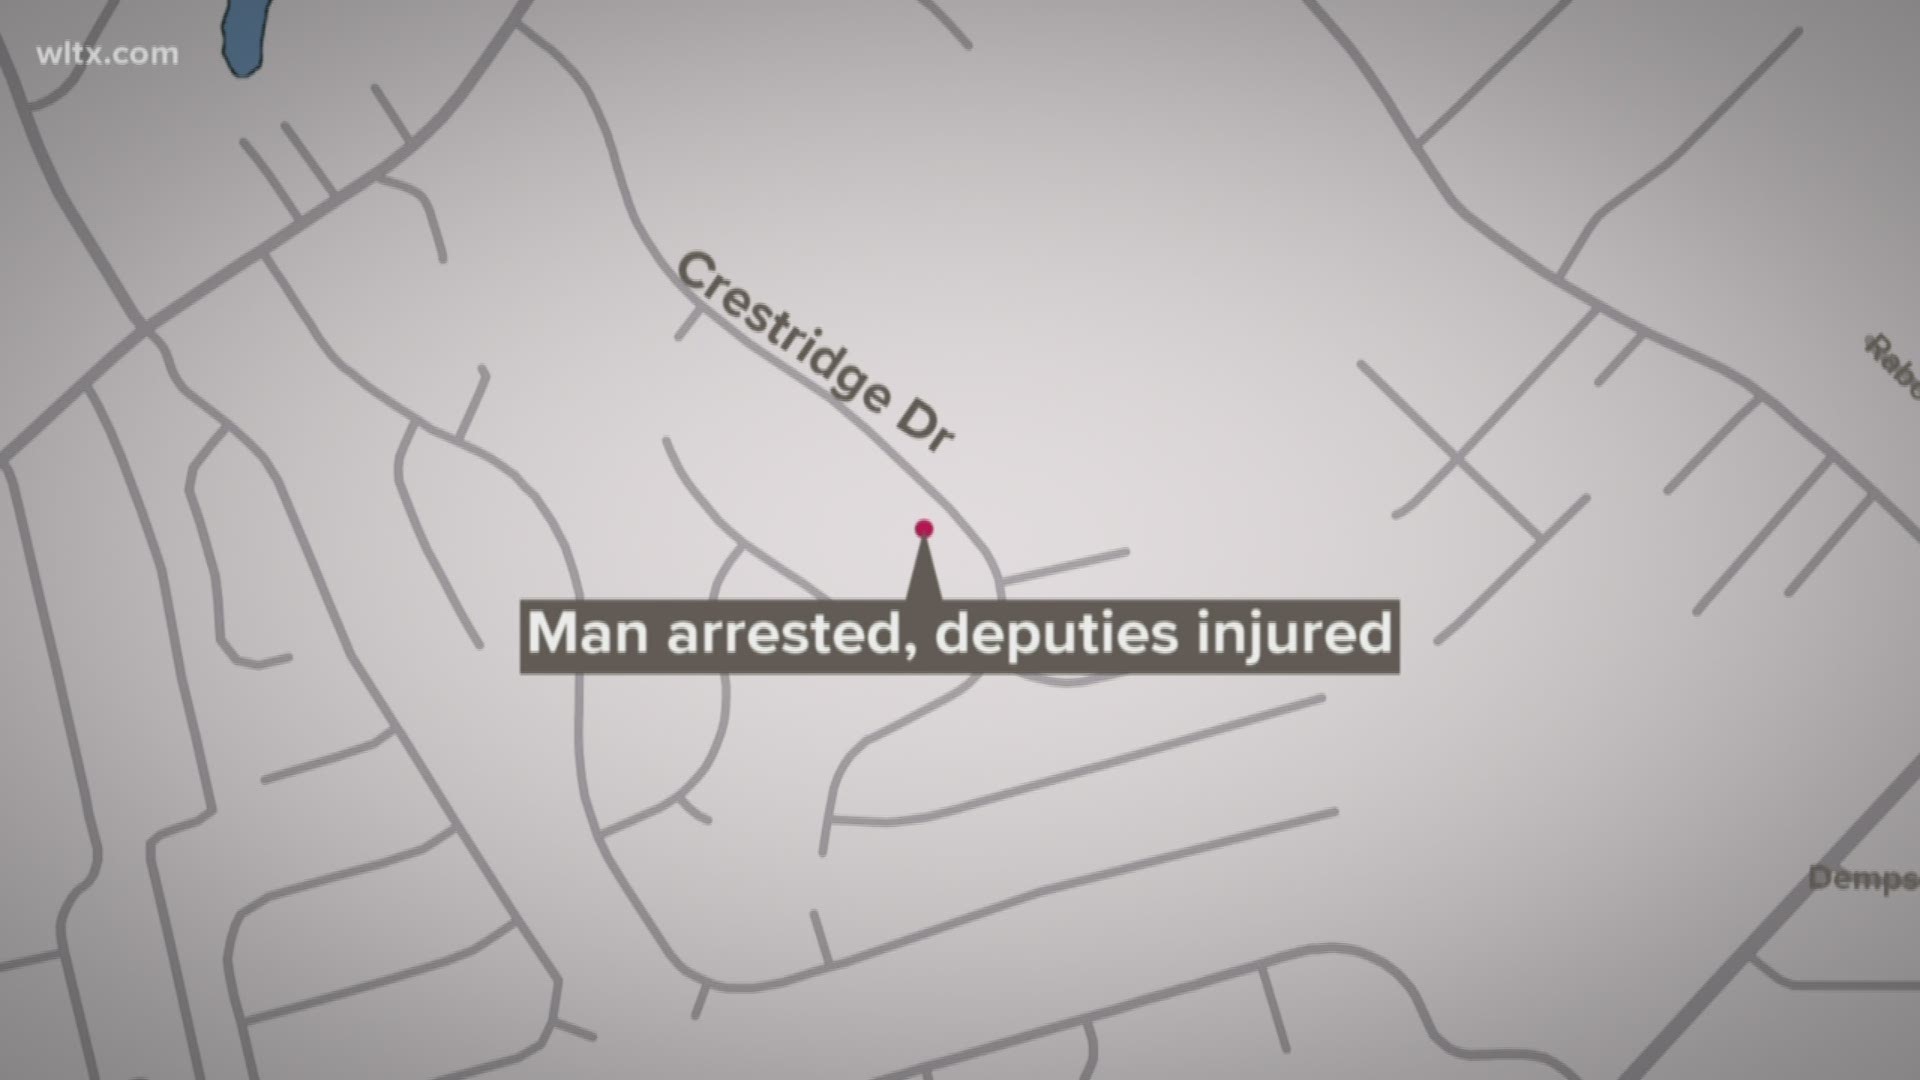 One deputy broke his hand and the other was bitten while responding to a patrol call on Wednesday.